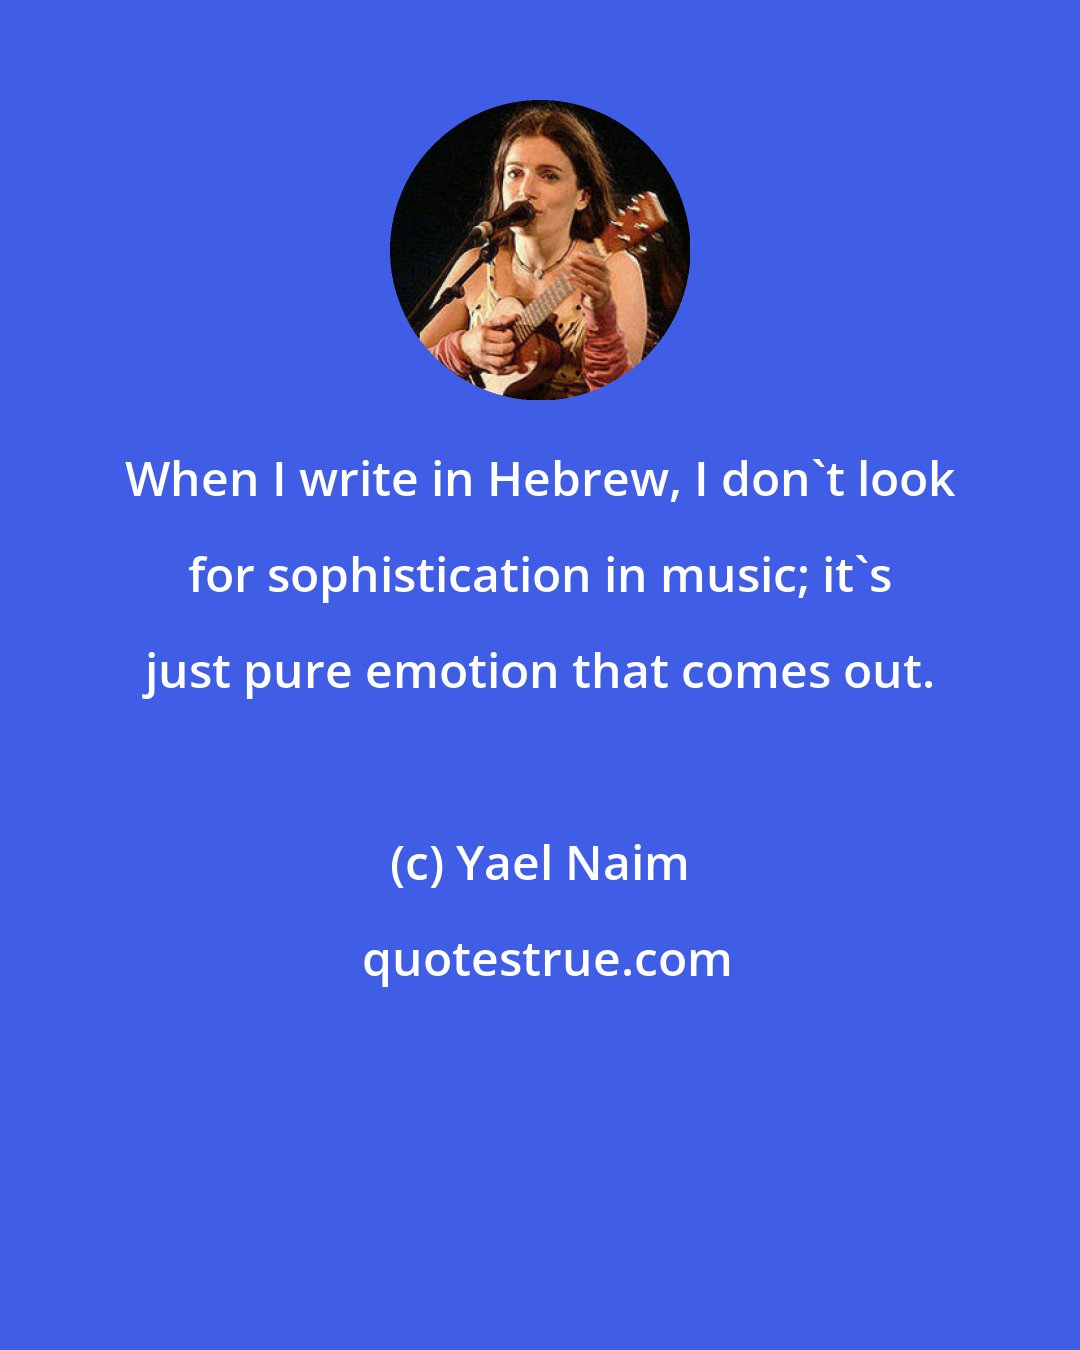 Yael Naim: When I write in Hebrew, I don't look for sophistication in music; it's just pure emotion that comes out.